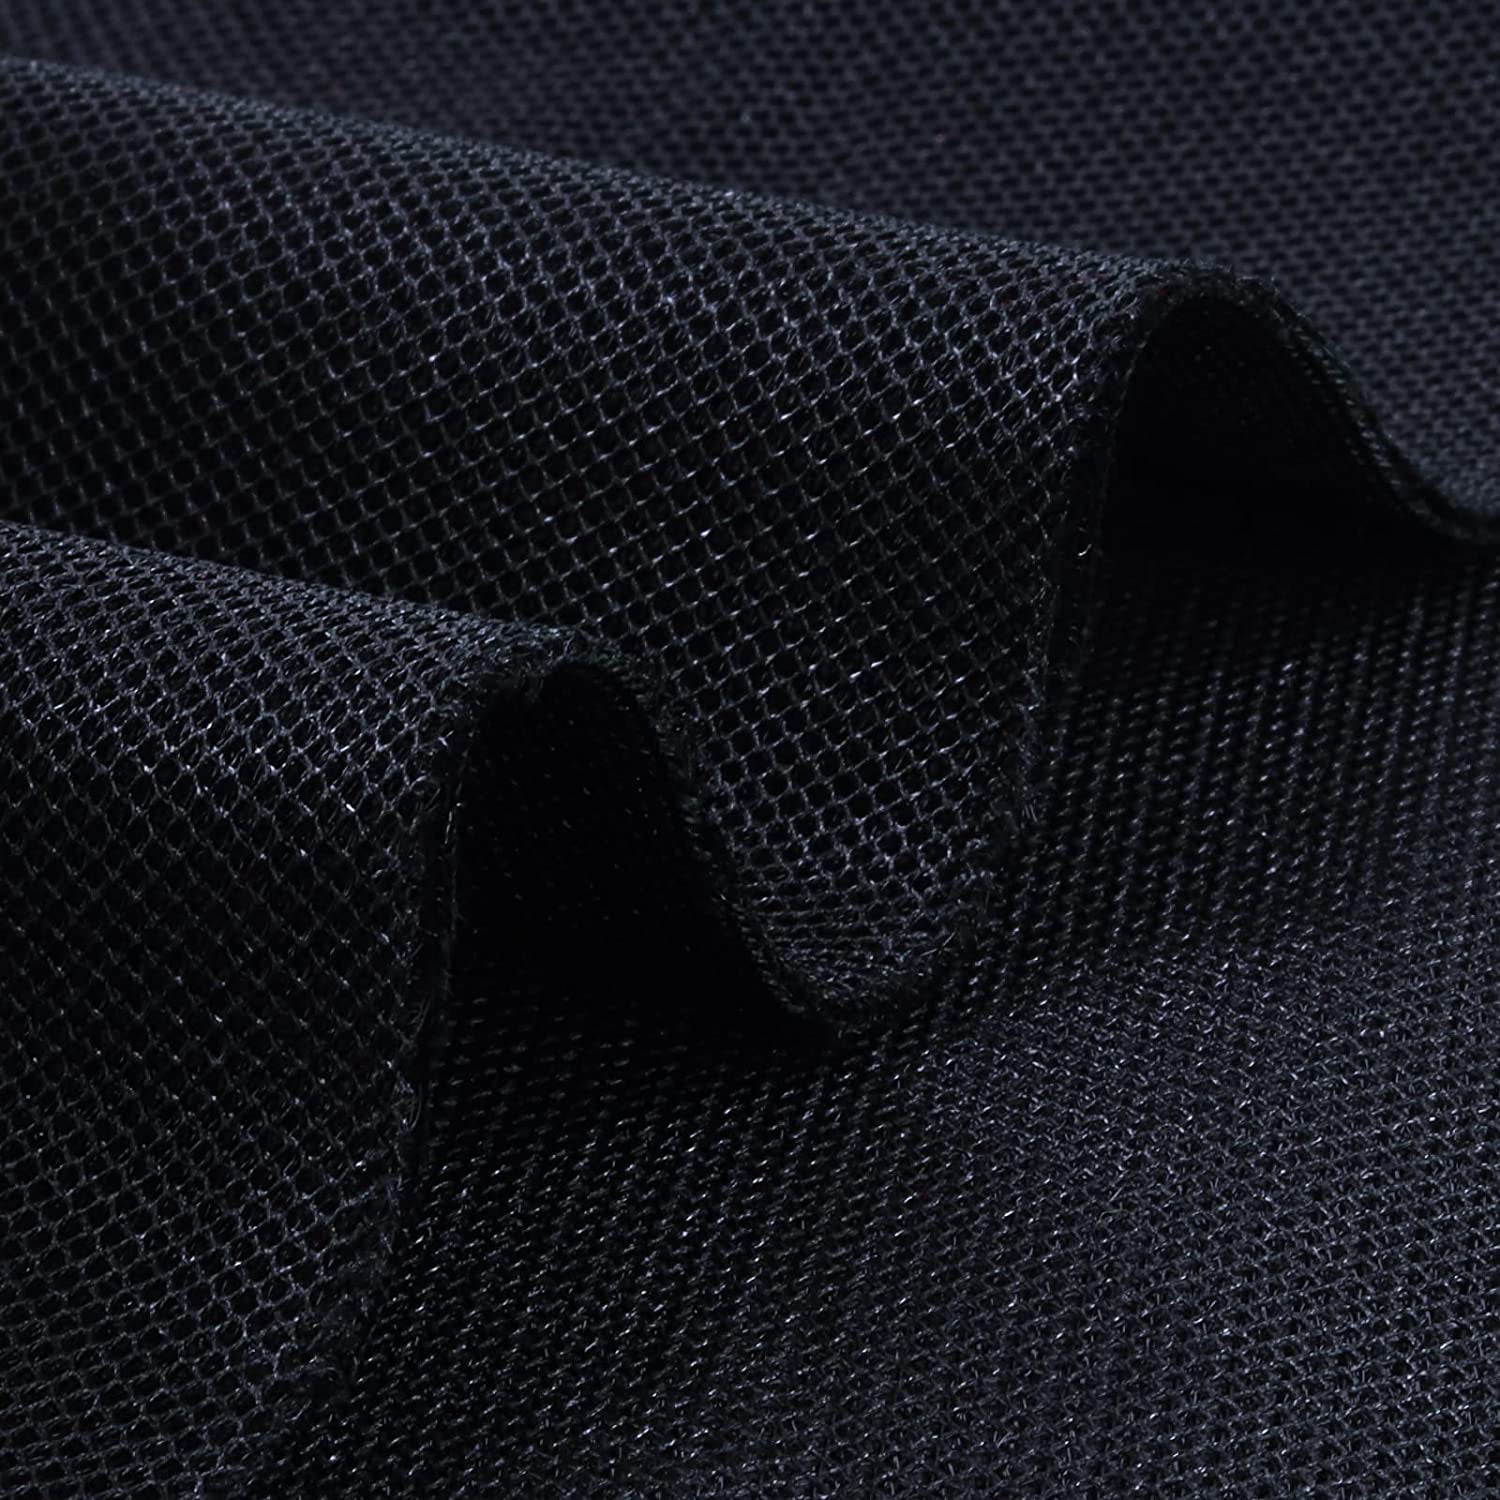 3D Air Sandwich Mesh Fabric Spacer Fabric Polyester Material for Automotive  & Household Seat Cover